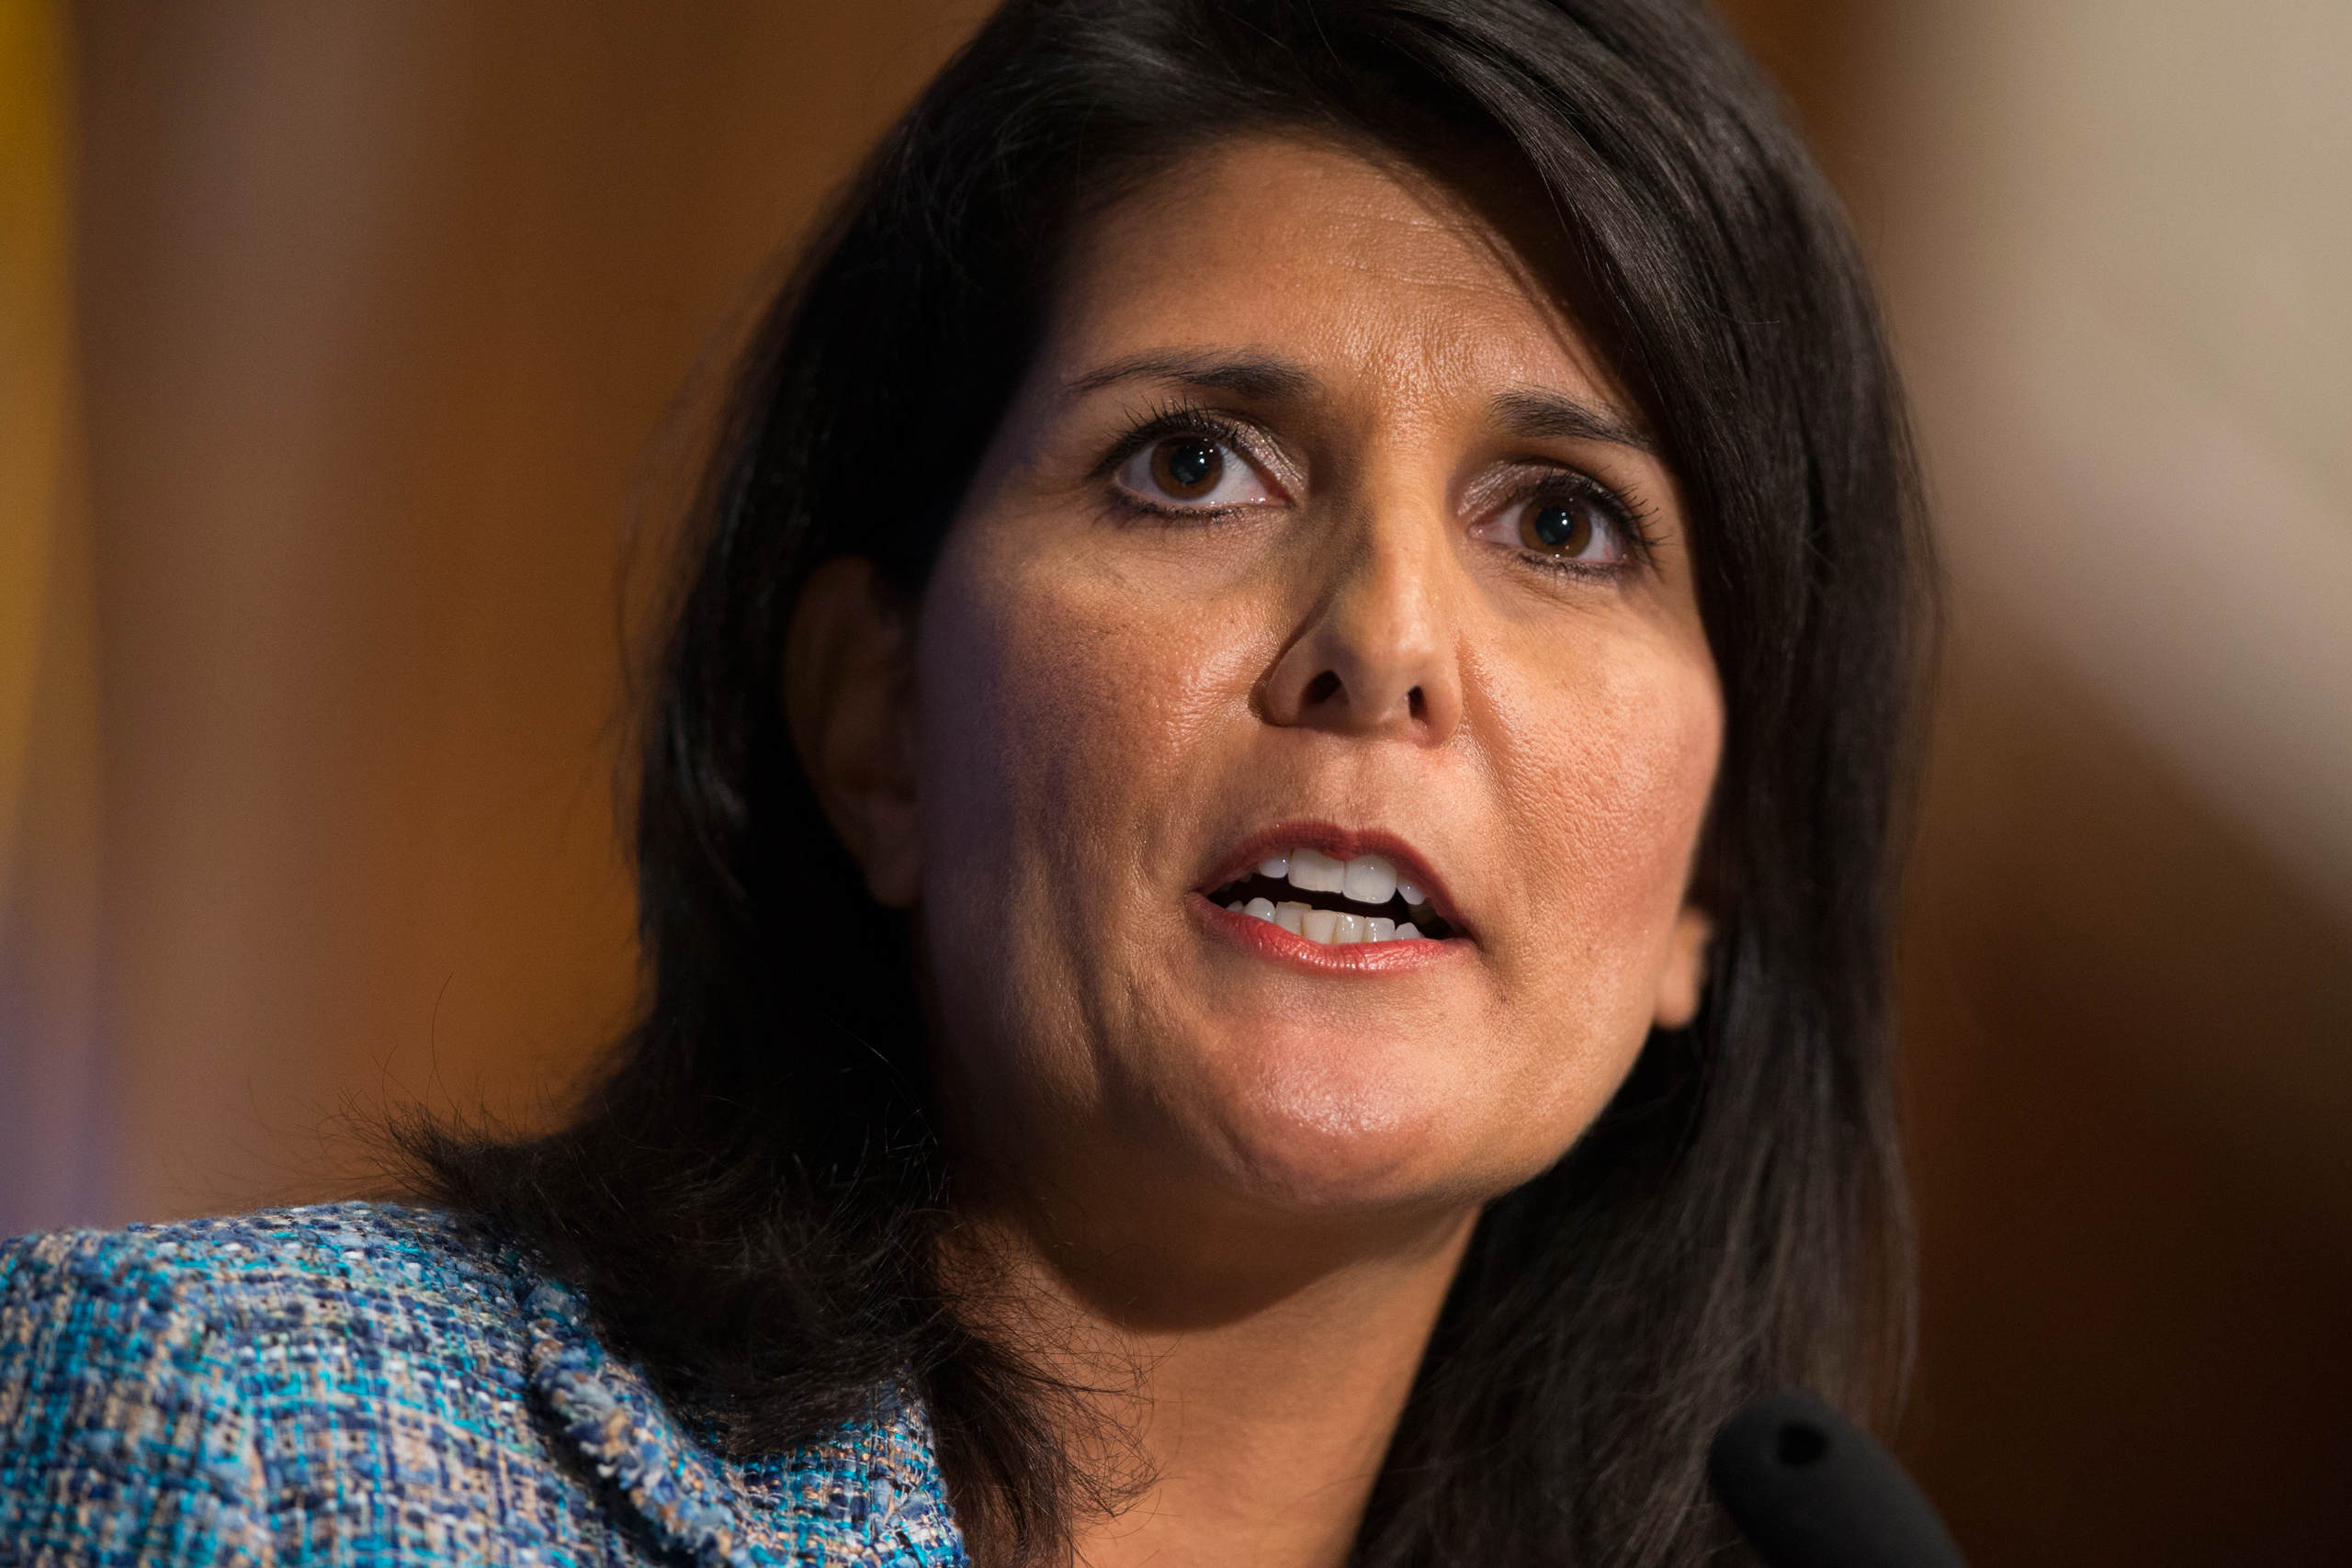 Gov. Nikki Haley delivers a speech on "Lessons from the New South" during a luncheon at the National Press Club in Washington on Sept. 2, 2015. (Evan Vucci—AP)